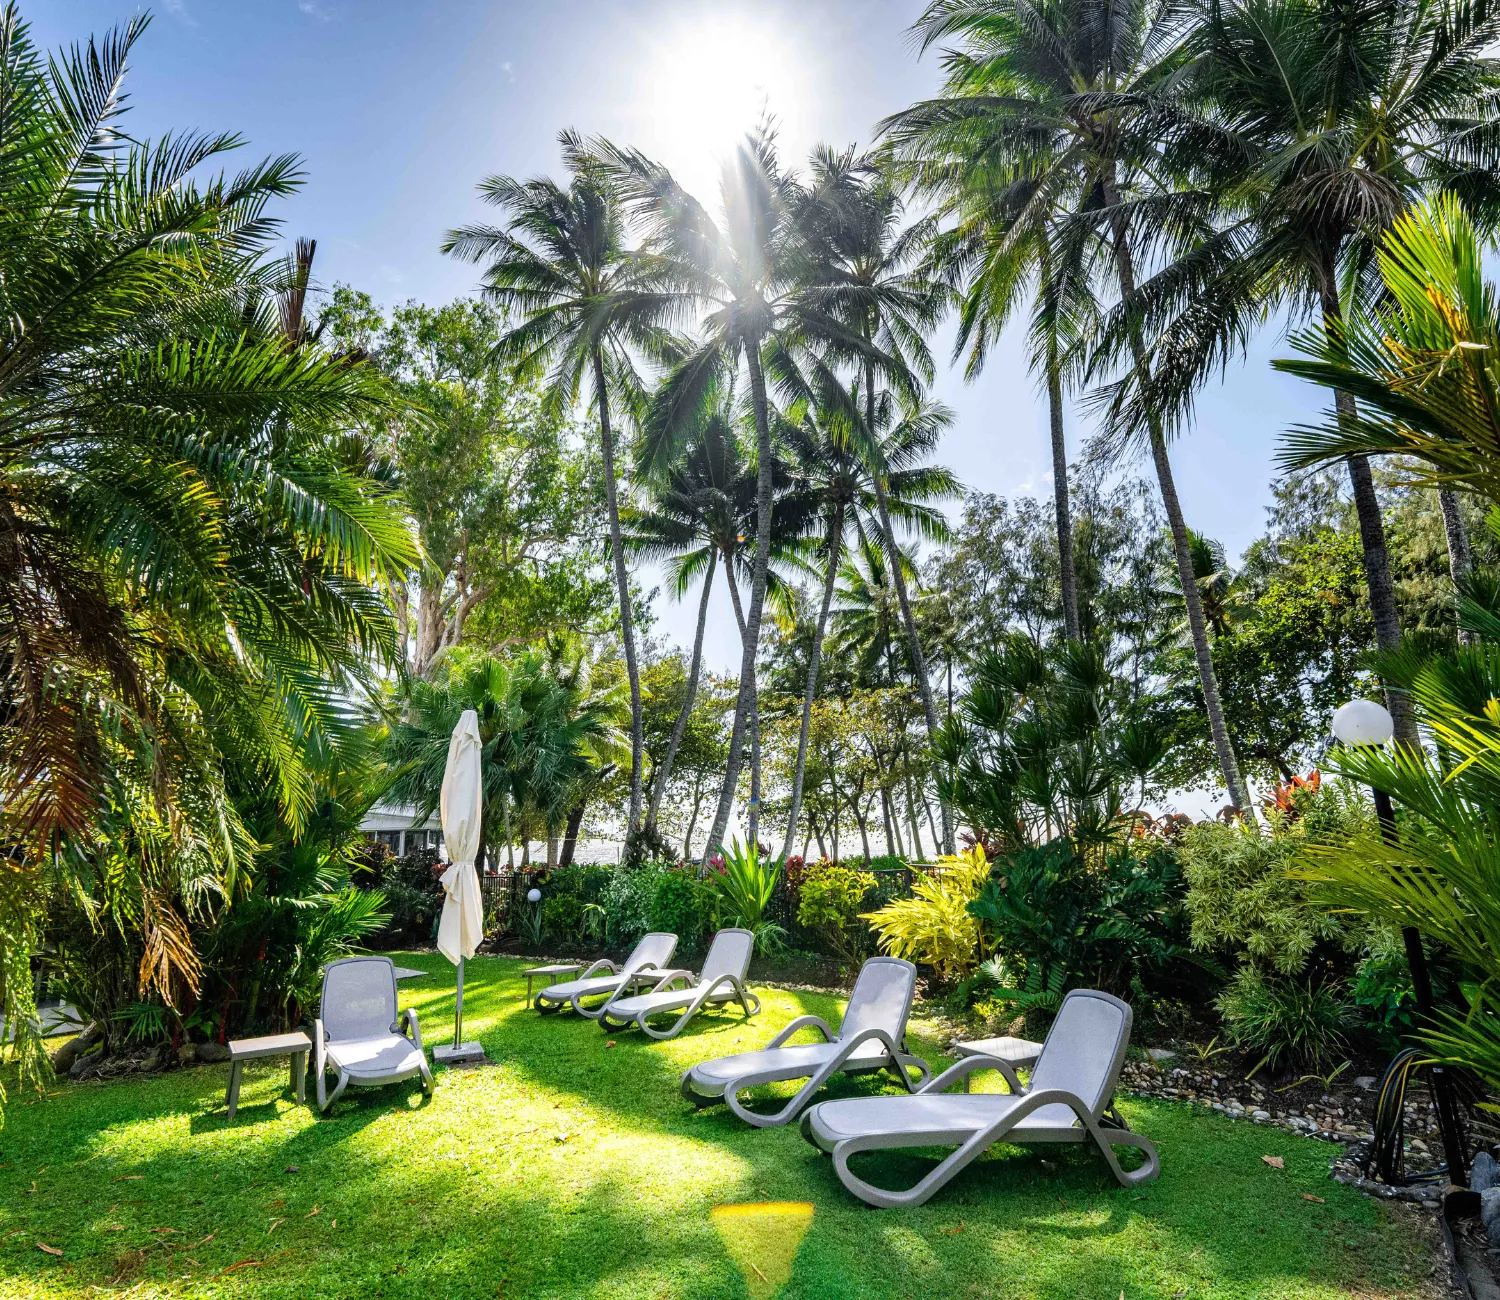 Grass area near pool with sun chairs and umbrellas surrounded by garden